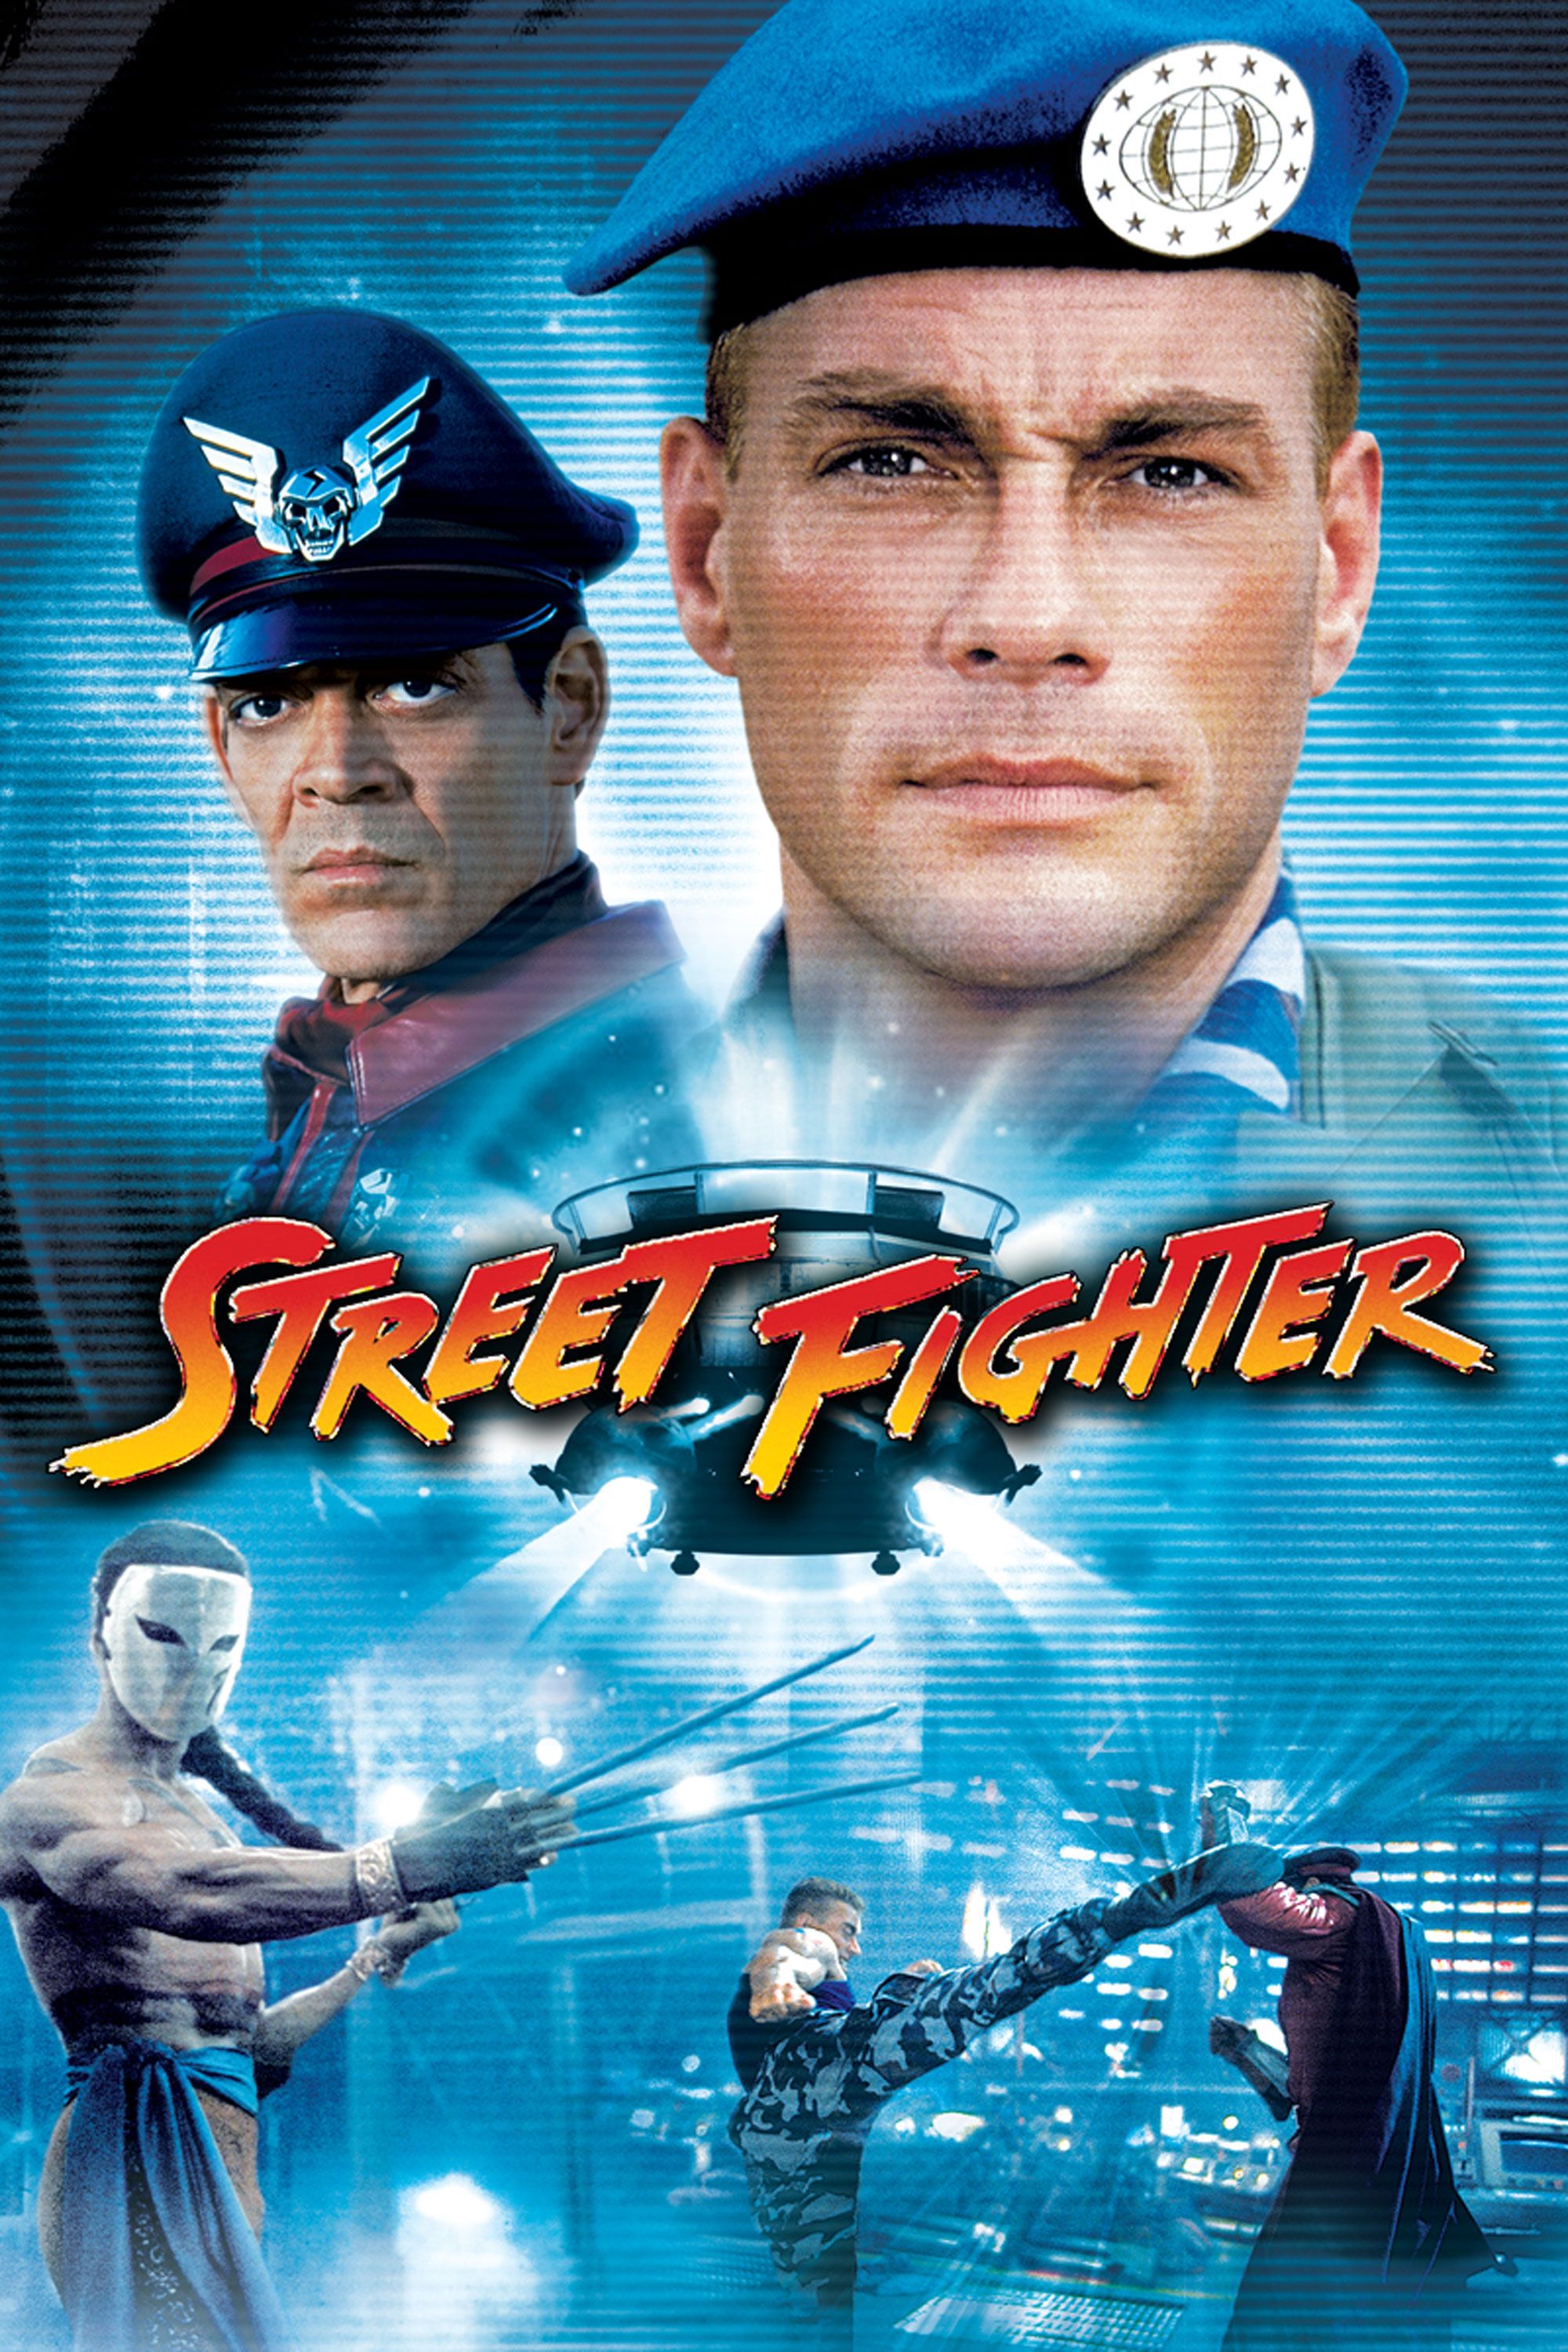 Every Street Fighter Movie and TV Show, Ranked From Worst To Best